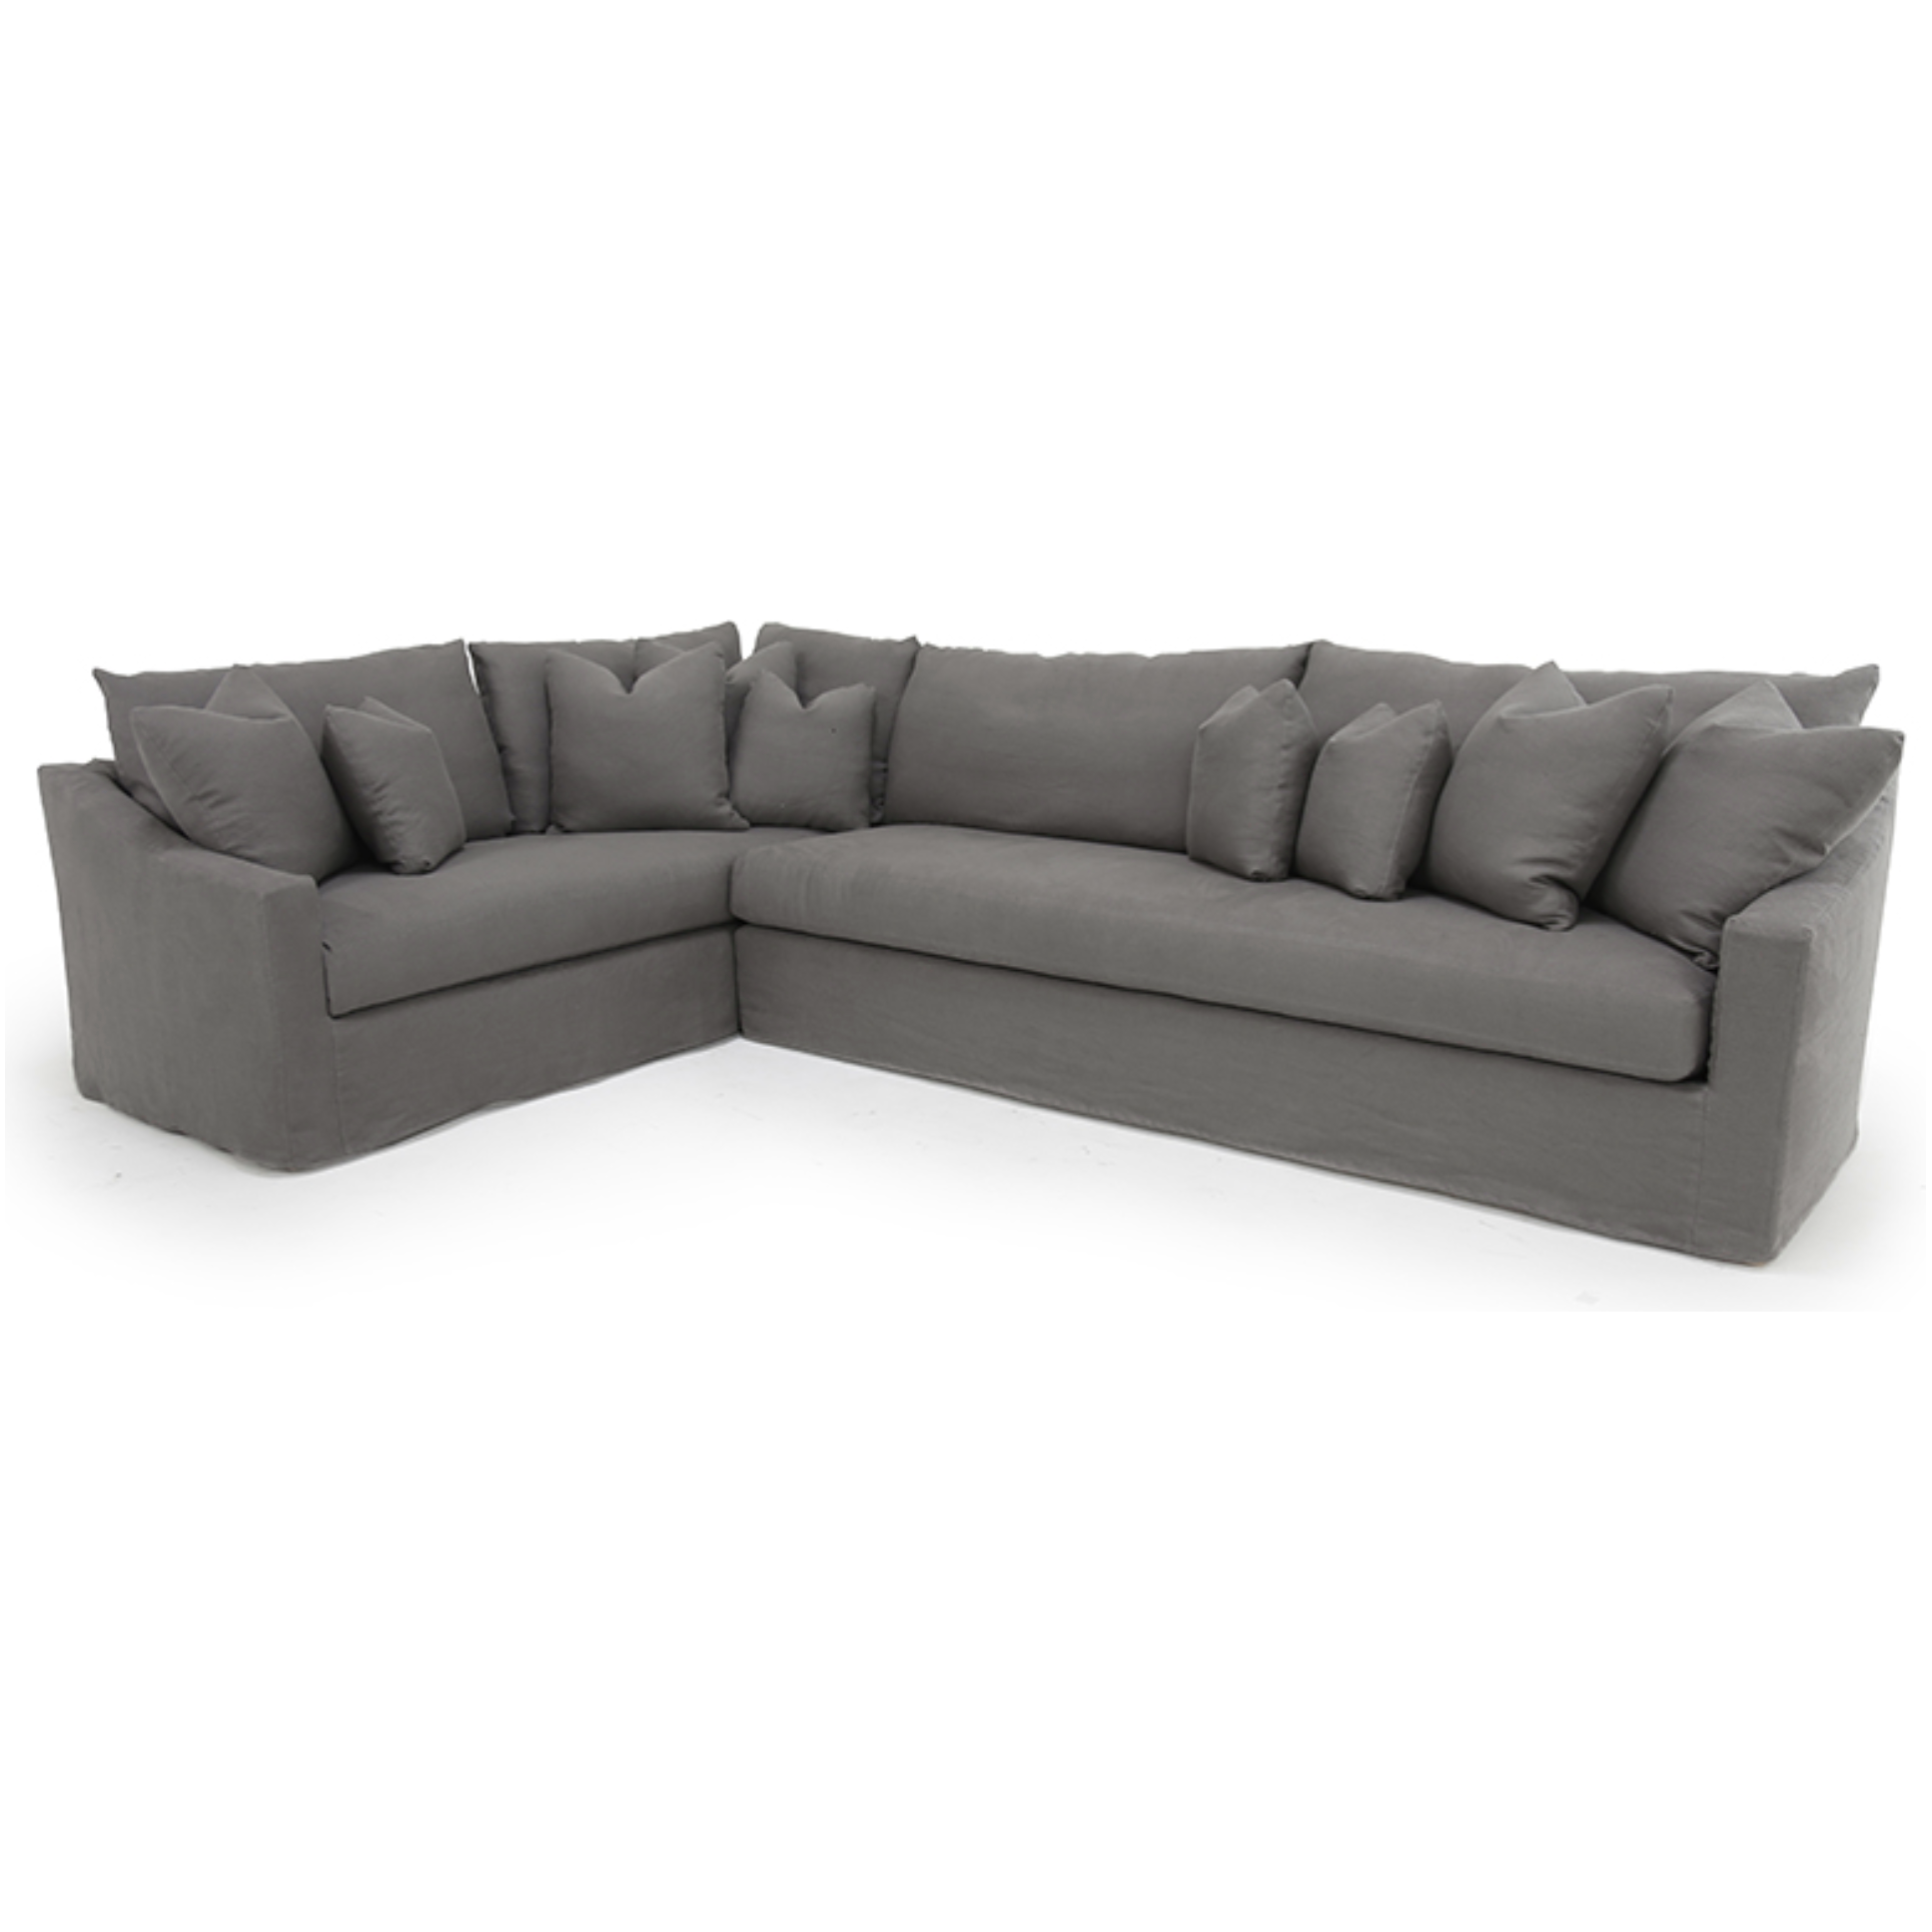 The Duke Sofa from Verellen is perfect for families and enjoyable in all seasons of life. Each sofa is custom made with your style, fabric, length, and comfort in mind. When your sofa is made, it's created from sustainably harvested hardwood. Amethyst Home proudly serves the Austin, Houston, and Dallas Texas metro.